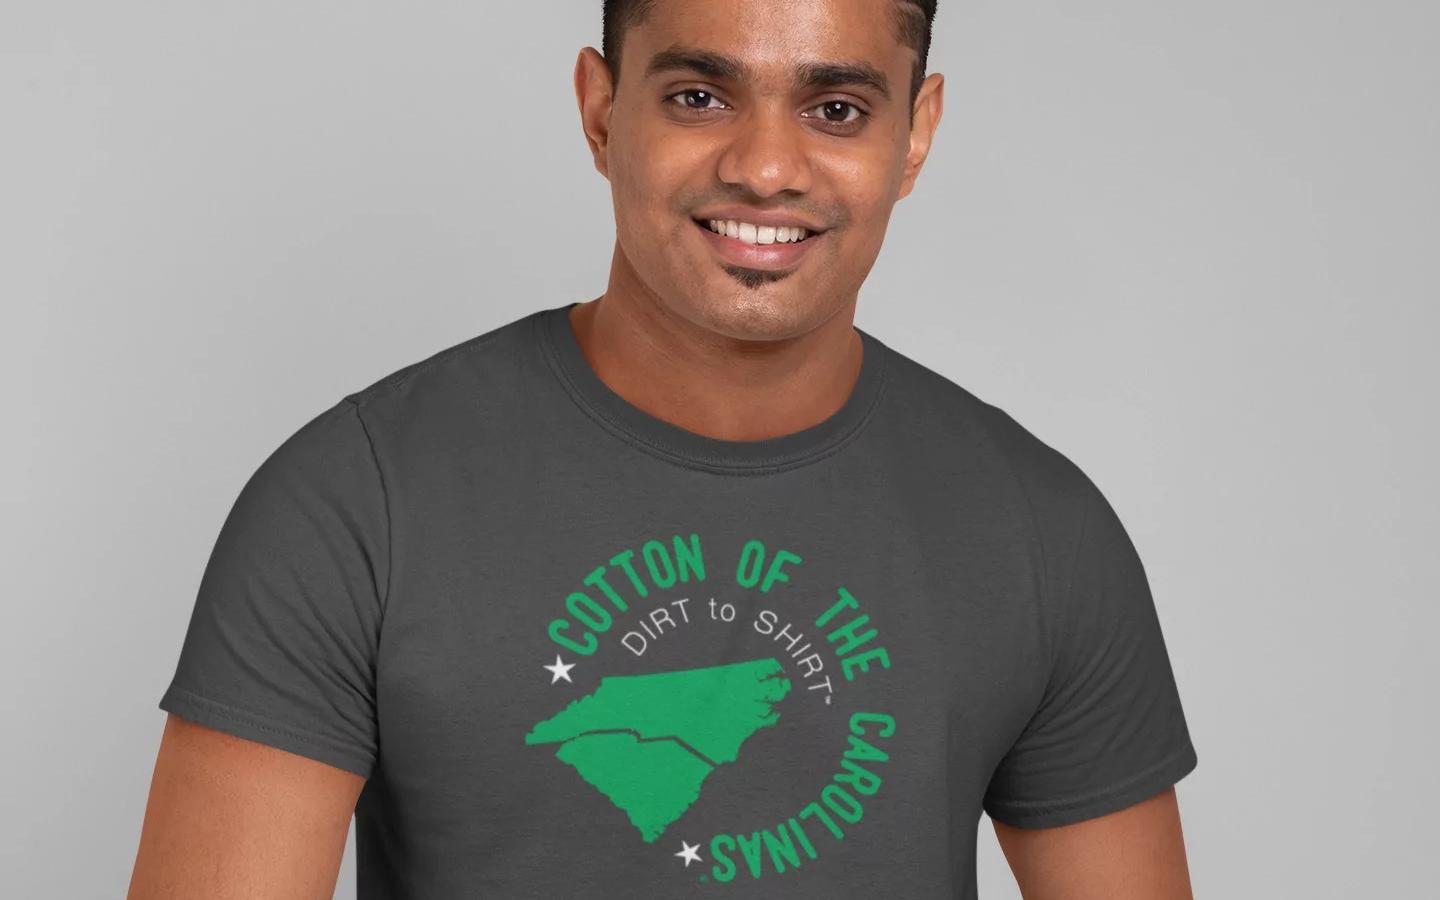 A man of color poses against a grey wall in a dark grey t-shirt made by TS Designs. The shirt reads in green font: "Cotton of the Carolinas. Dirt to Shirt." Small business benefits community.